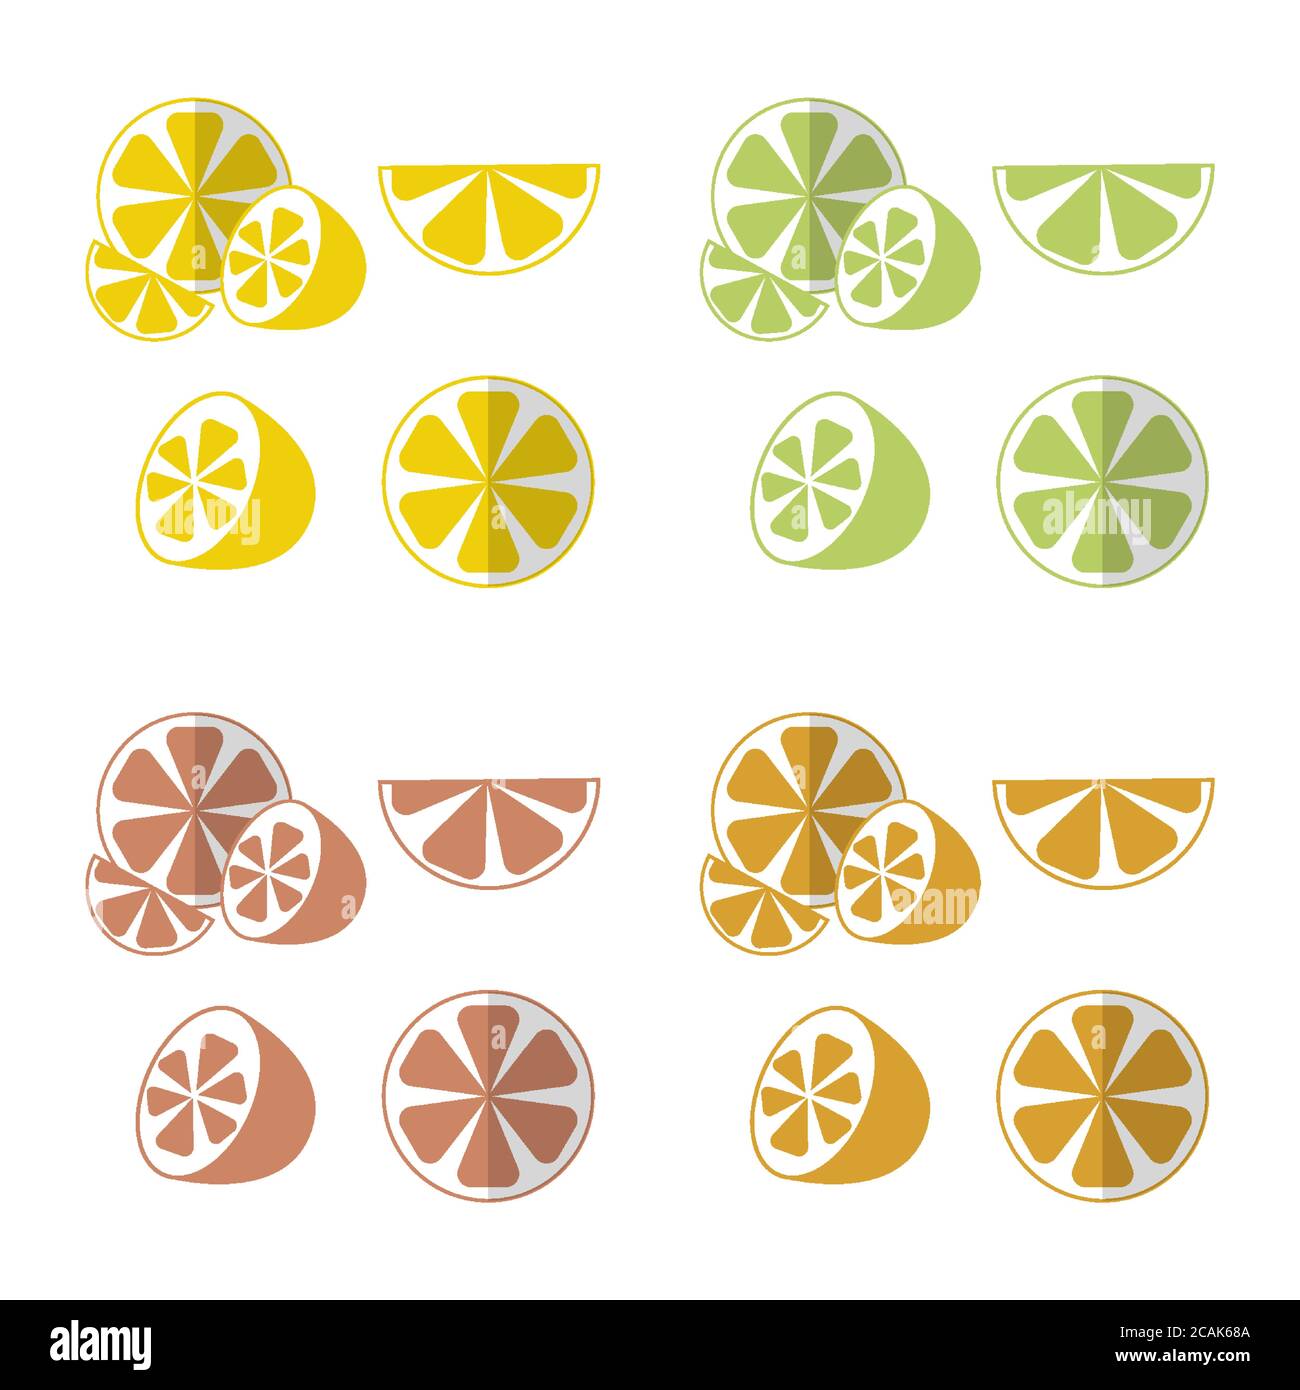 Citrus set halved and sliced pieces. Lemon, lime, orange, grapefruit, fruits collection in flat style with shadow. Isolated vector illustration. Stock Vector